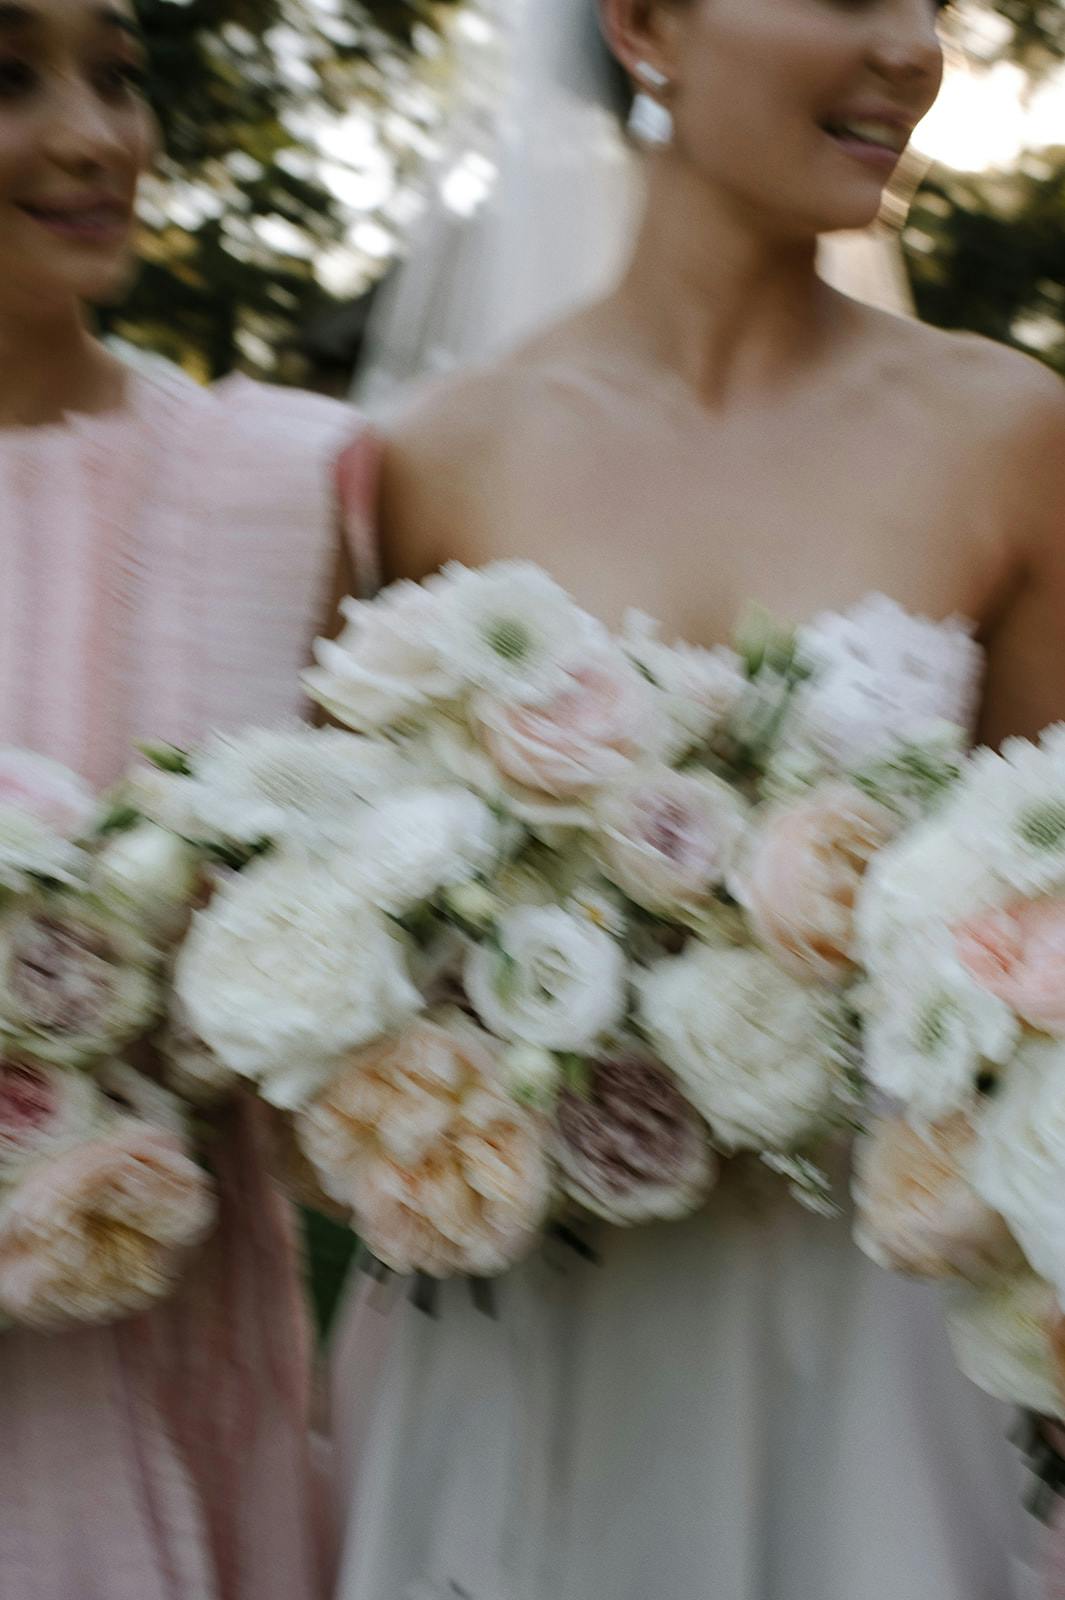 A blurred image shows two people standing next to each other, holding large bouquets of white and pastel-colored flowers. The person on the right is wearing a white strapless dress, while the person on the left is in a light pink outfit.